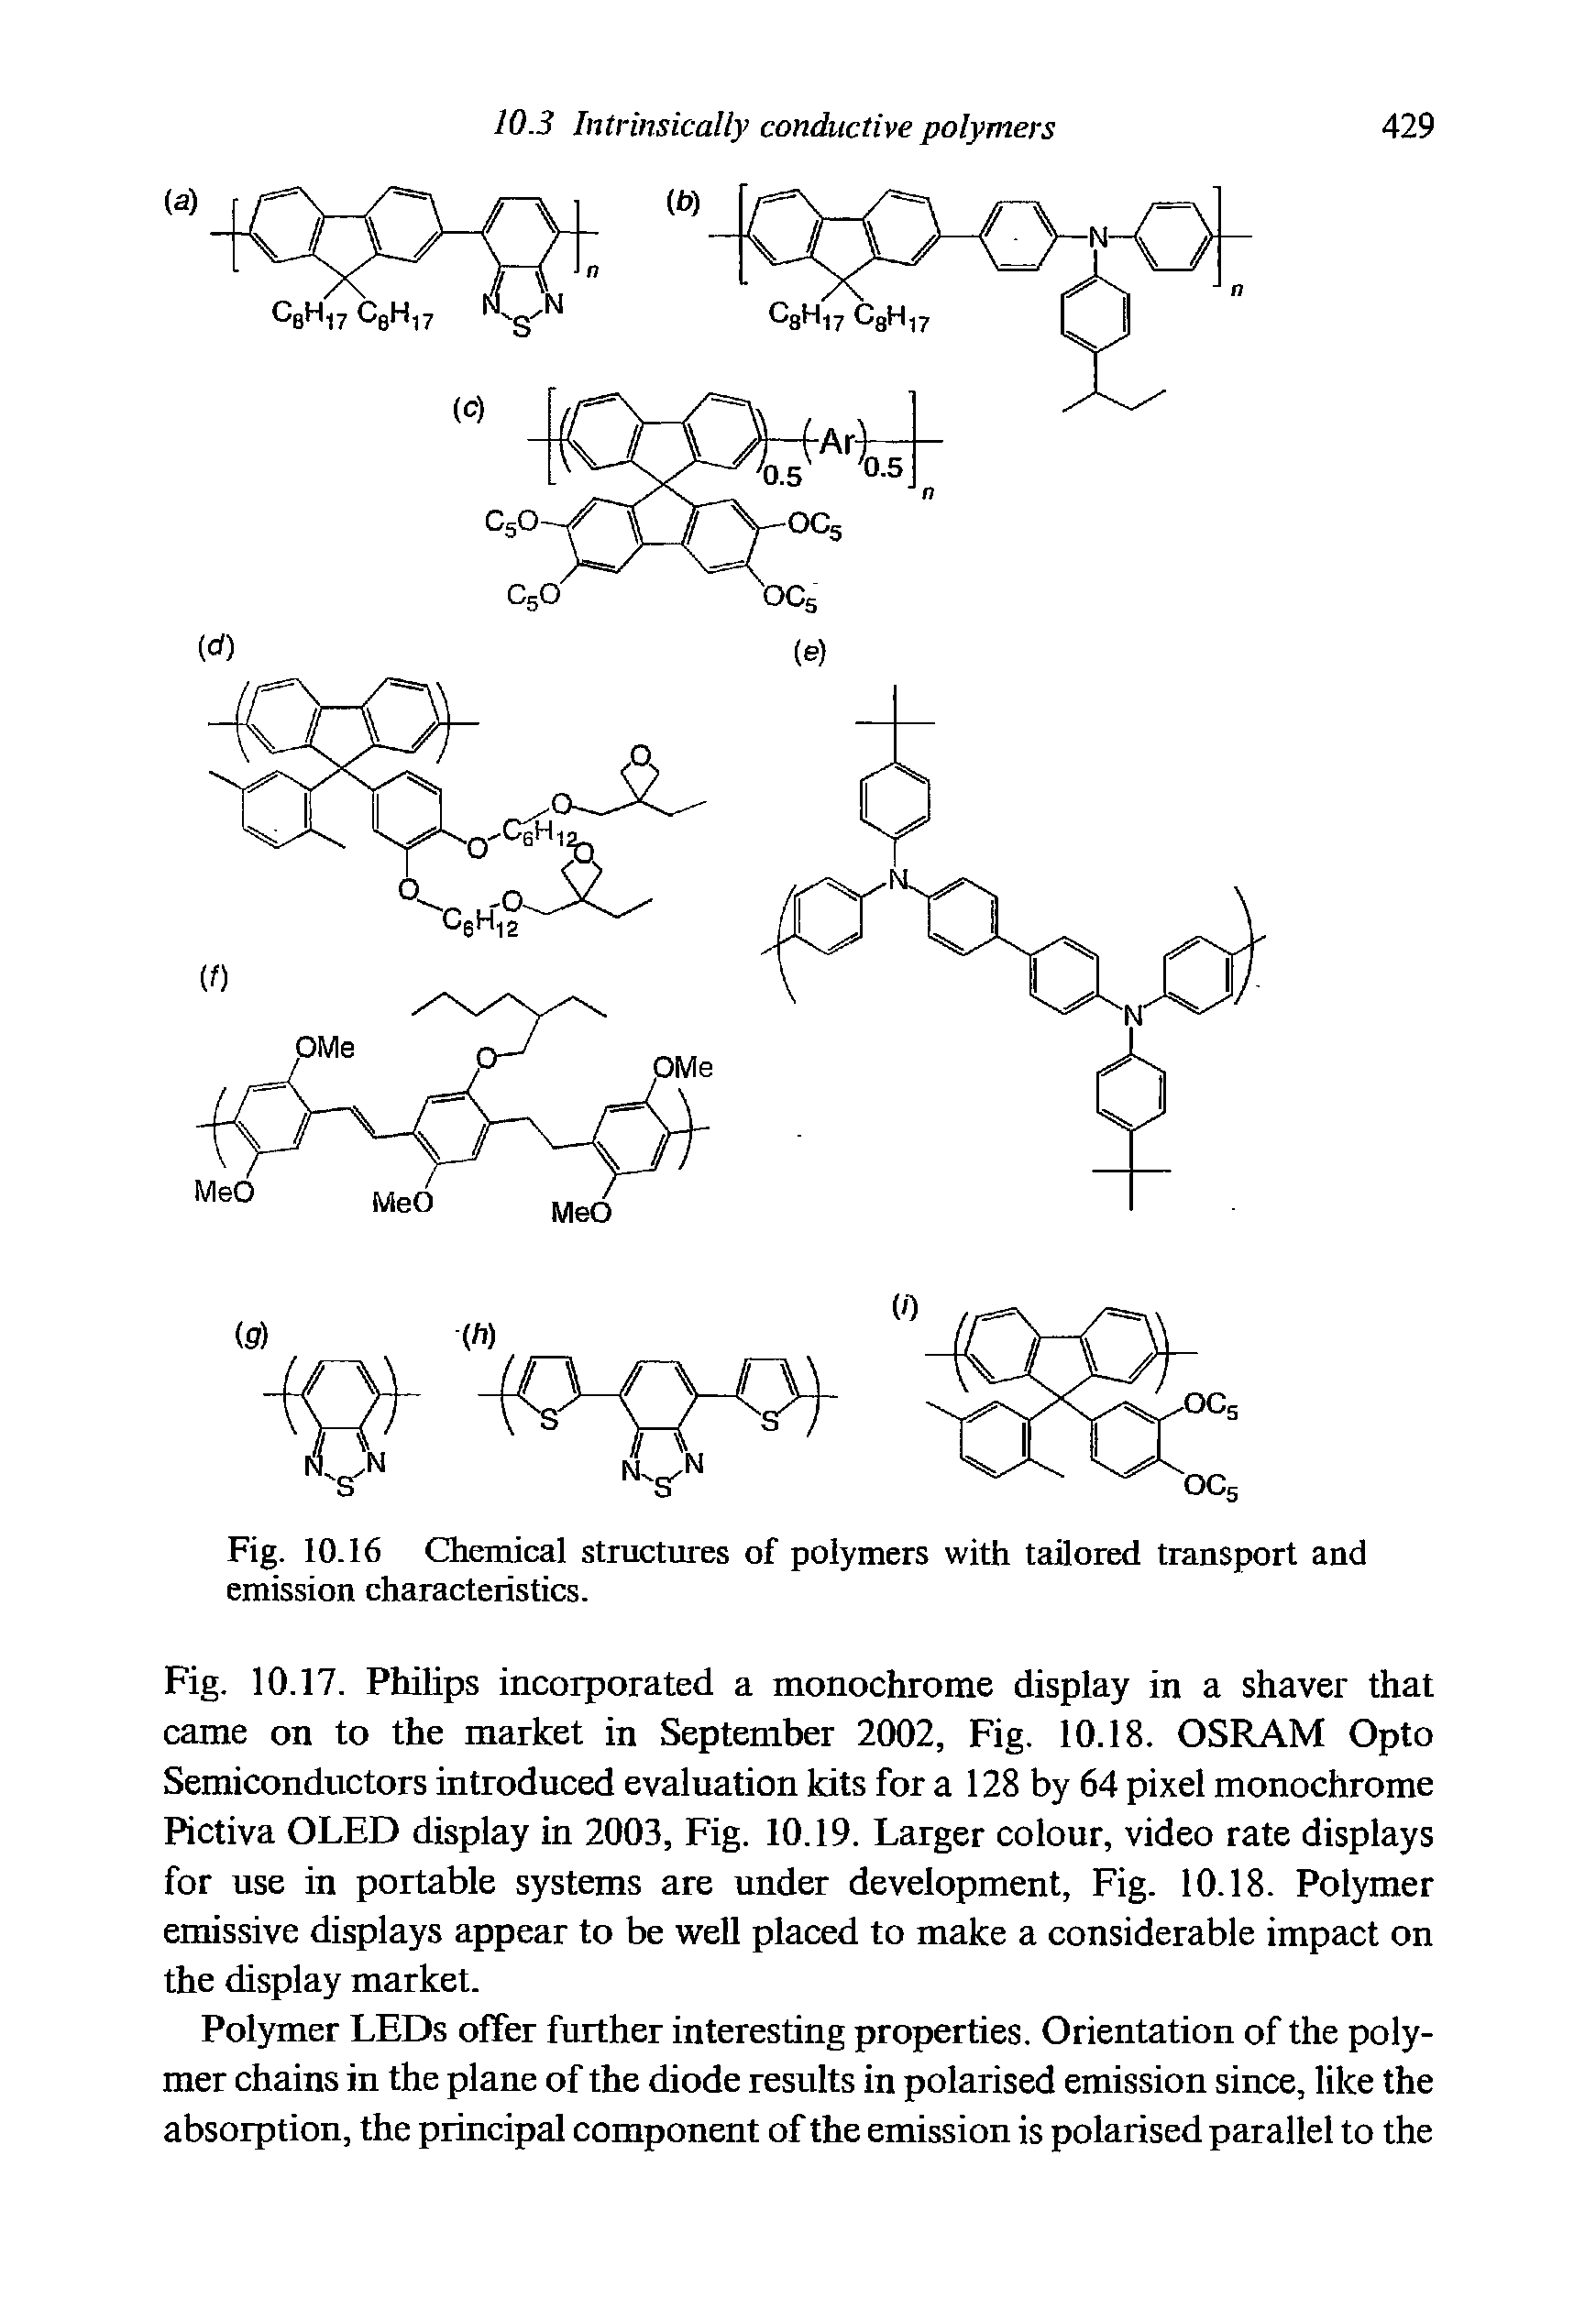 Fig. 10.16 Chemical structures of polymers with tailored transport and emission characteristics.